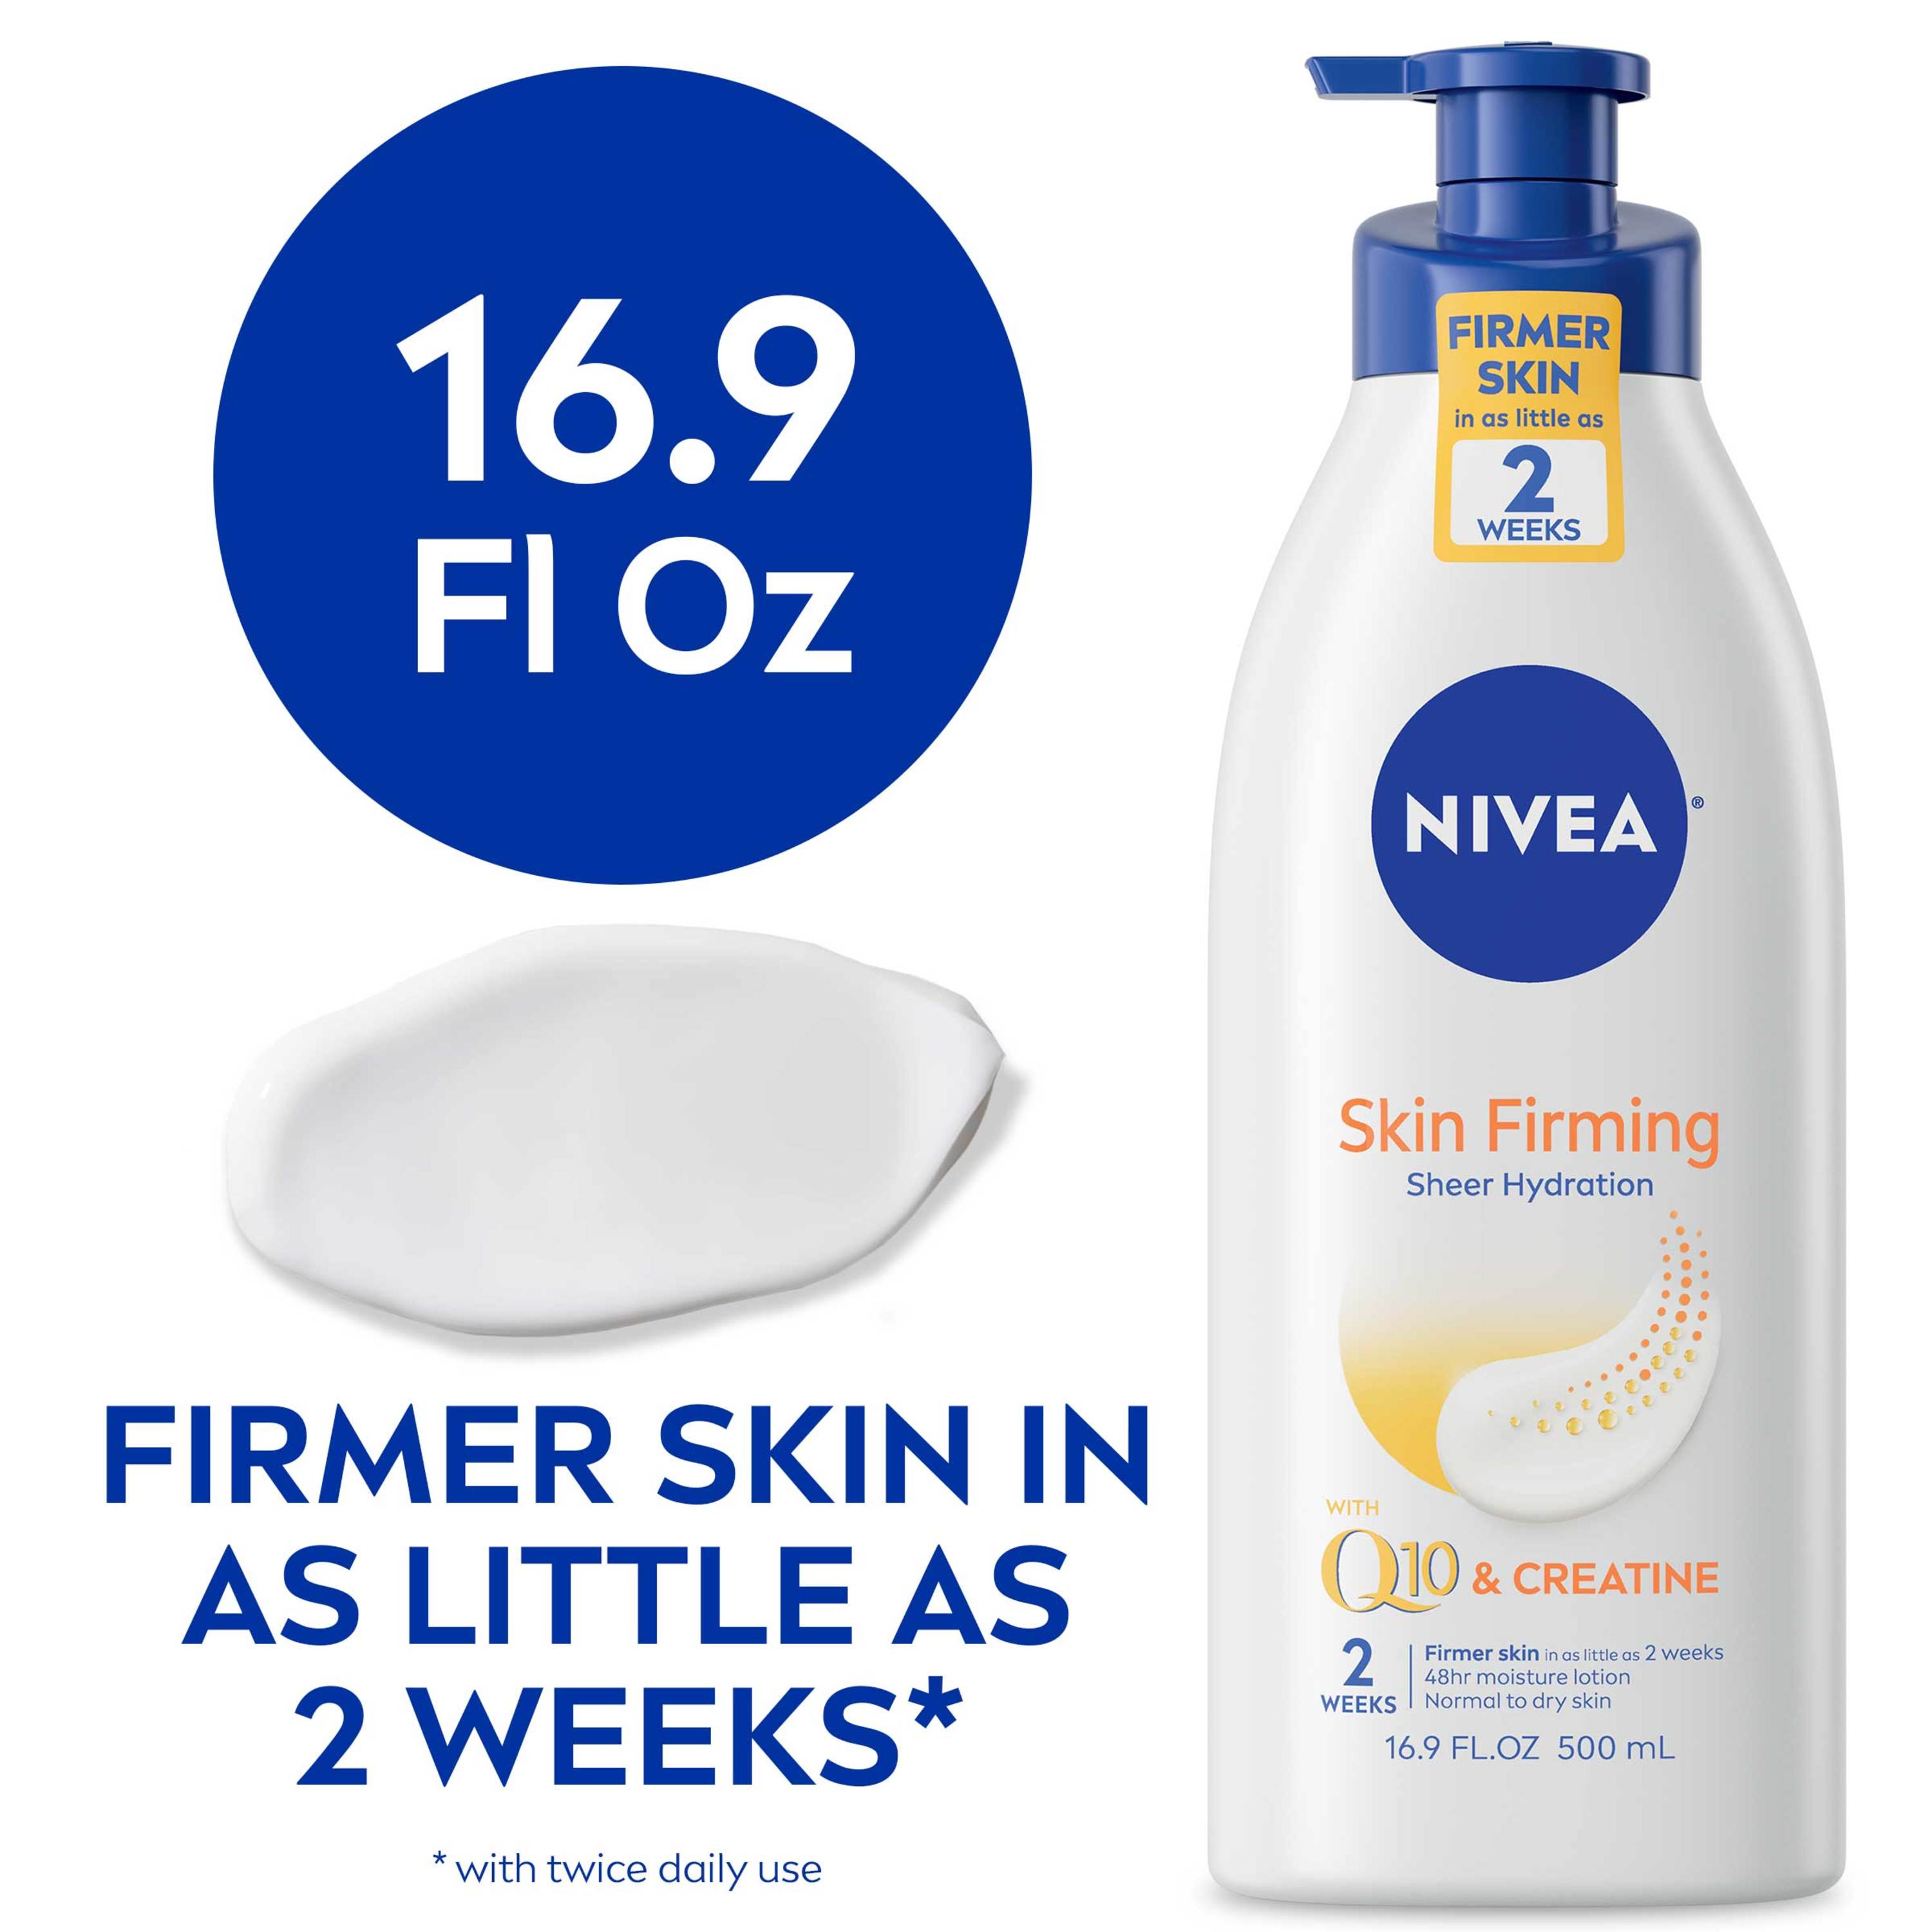 NIVEA Skin Firming Hydration Body Lotion with Q10 and Shea Butter, 16.9 Fl Oz Pump Bottle - image 1 of 12